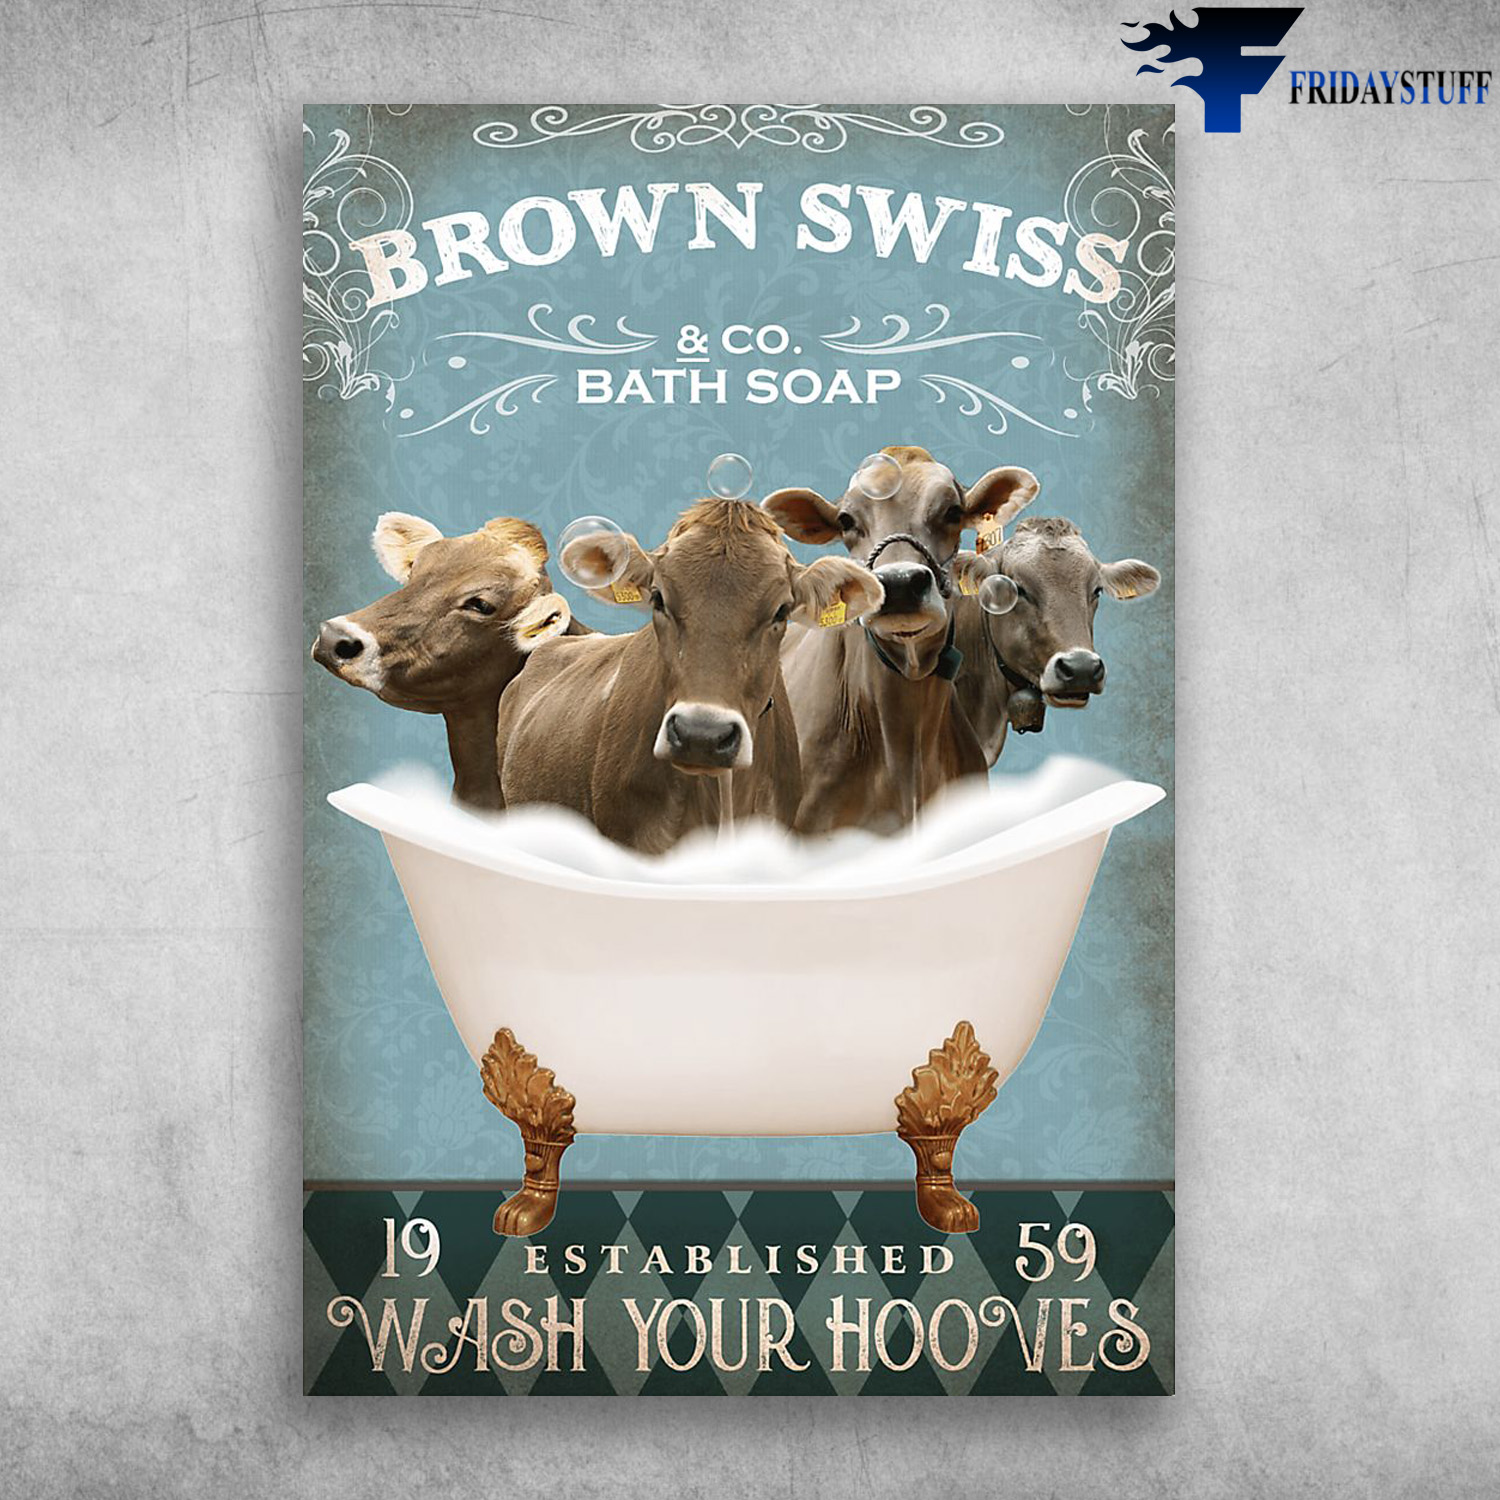 Brown Swiss Cows In Bath Soap - Brown Swiss, CO. Bathsoap, 19 Established 59, Wash Your Hooves